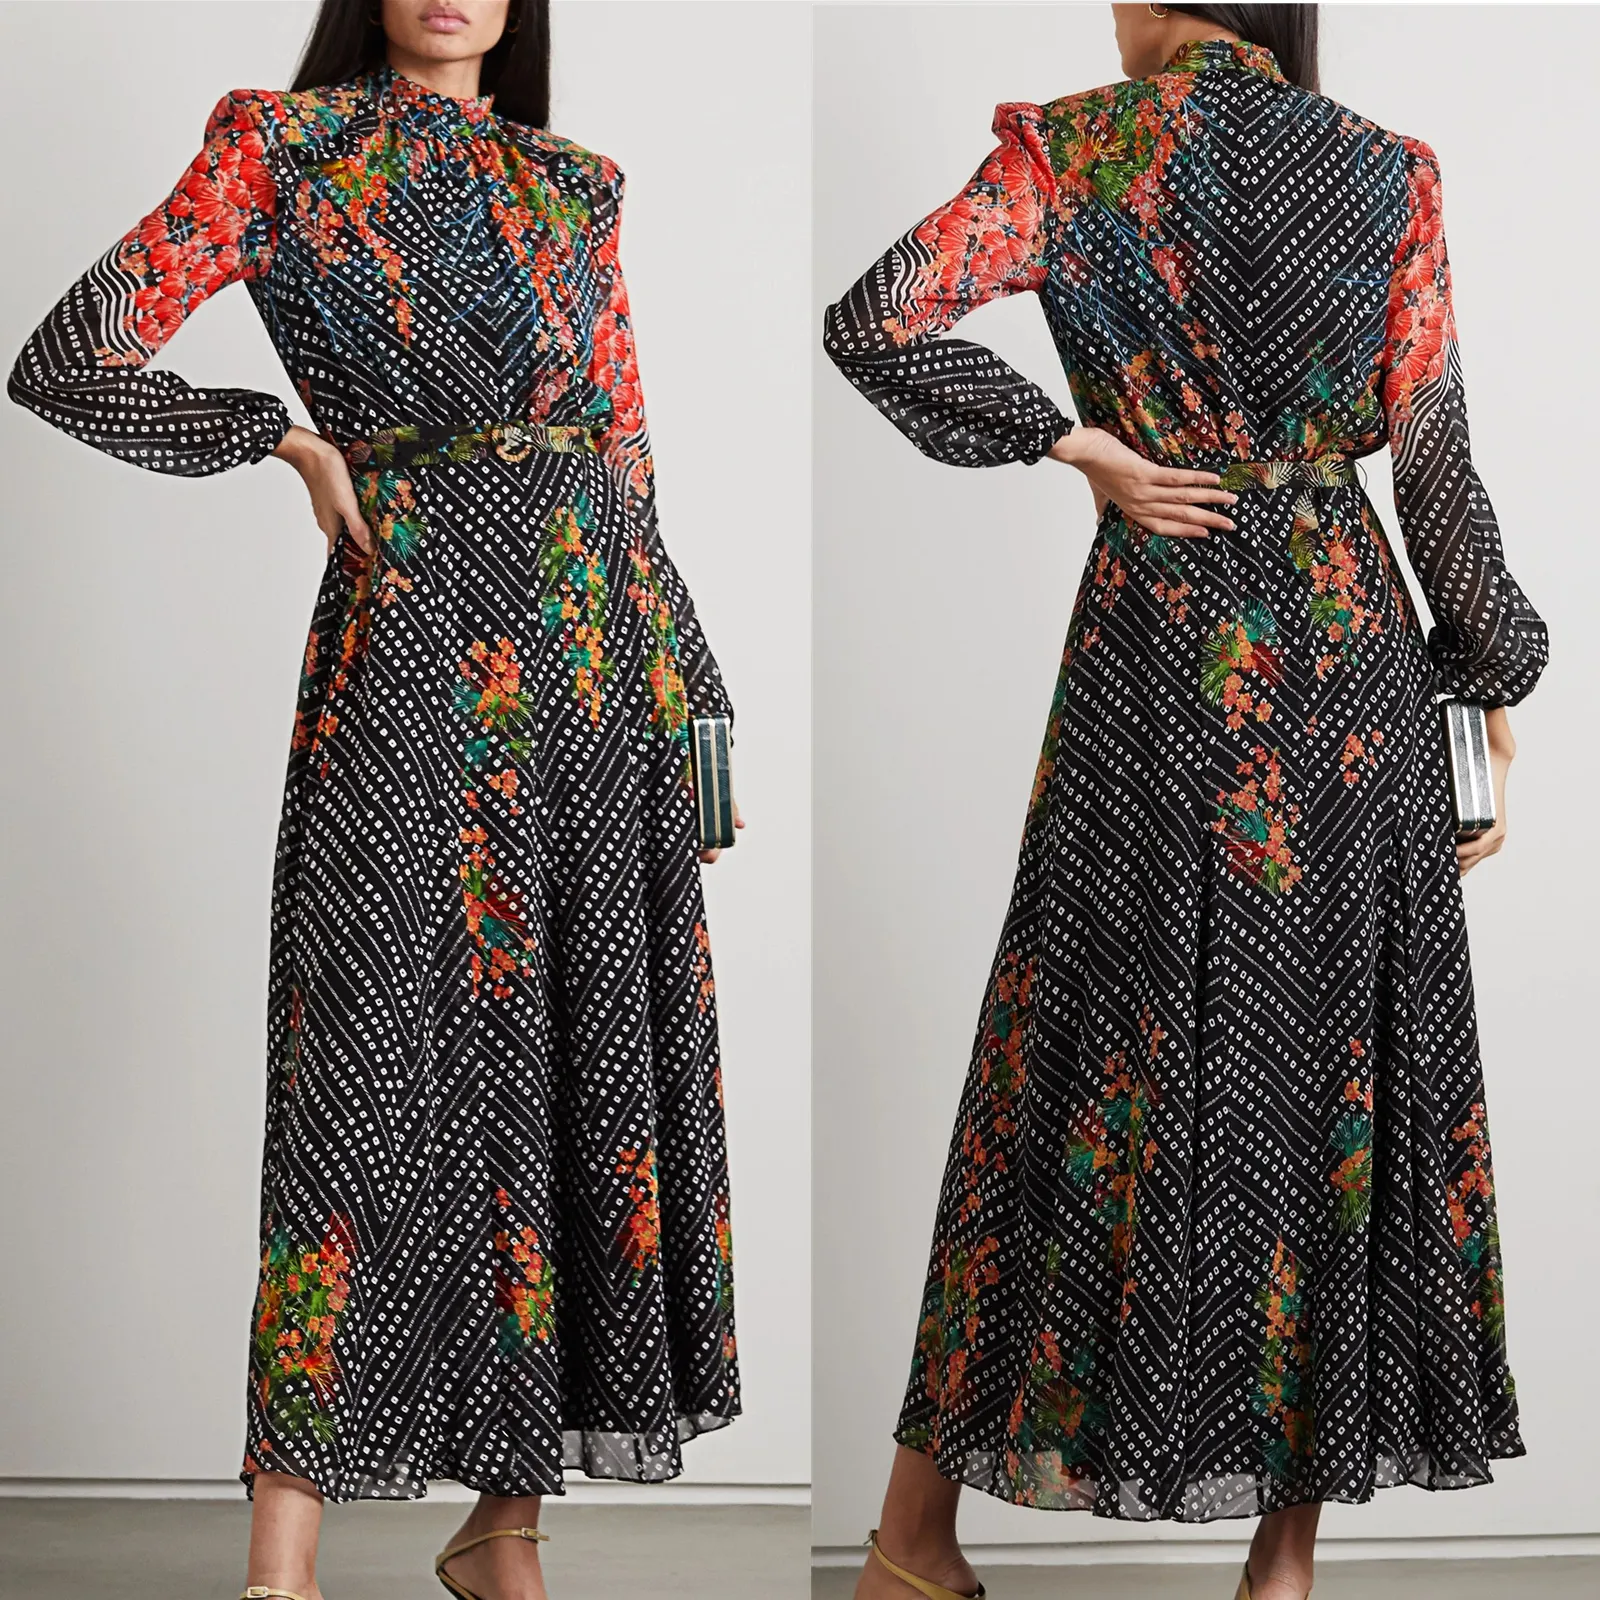 Dresses Women New Stylish Fashion Trendy 2021 Hot Selling Good Quality Women Long Sleeve Floral Dress Supplier From China